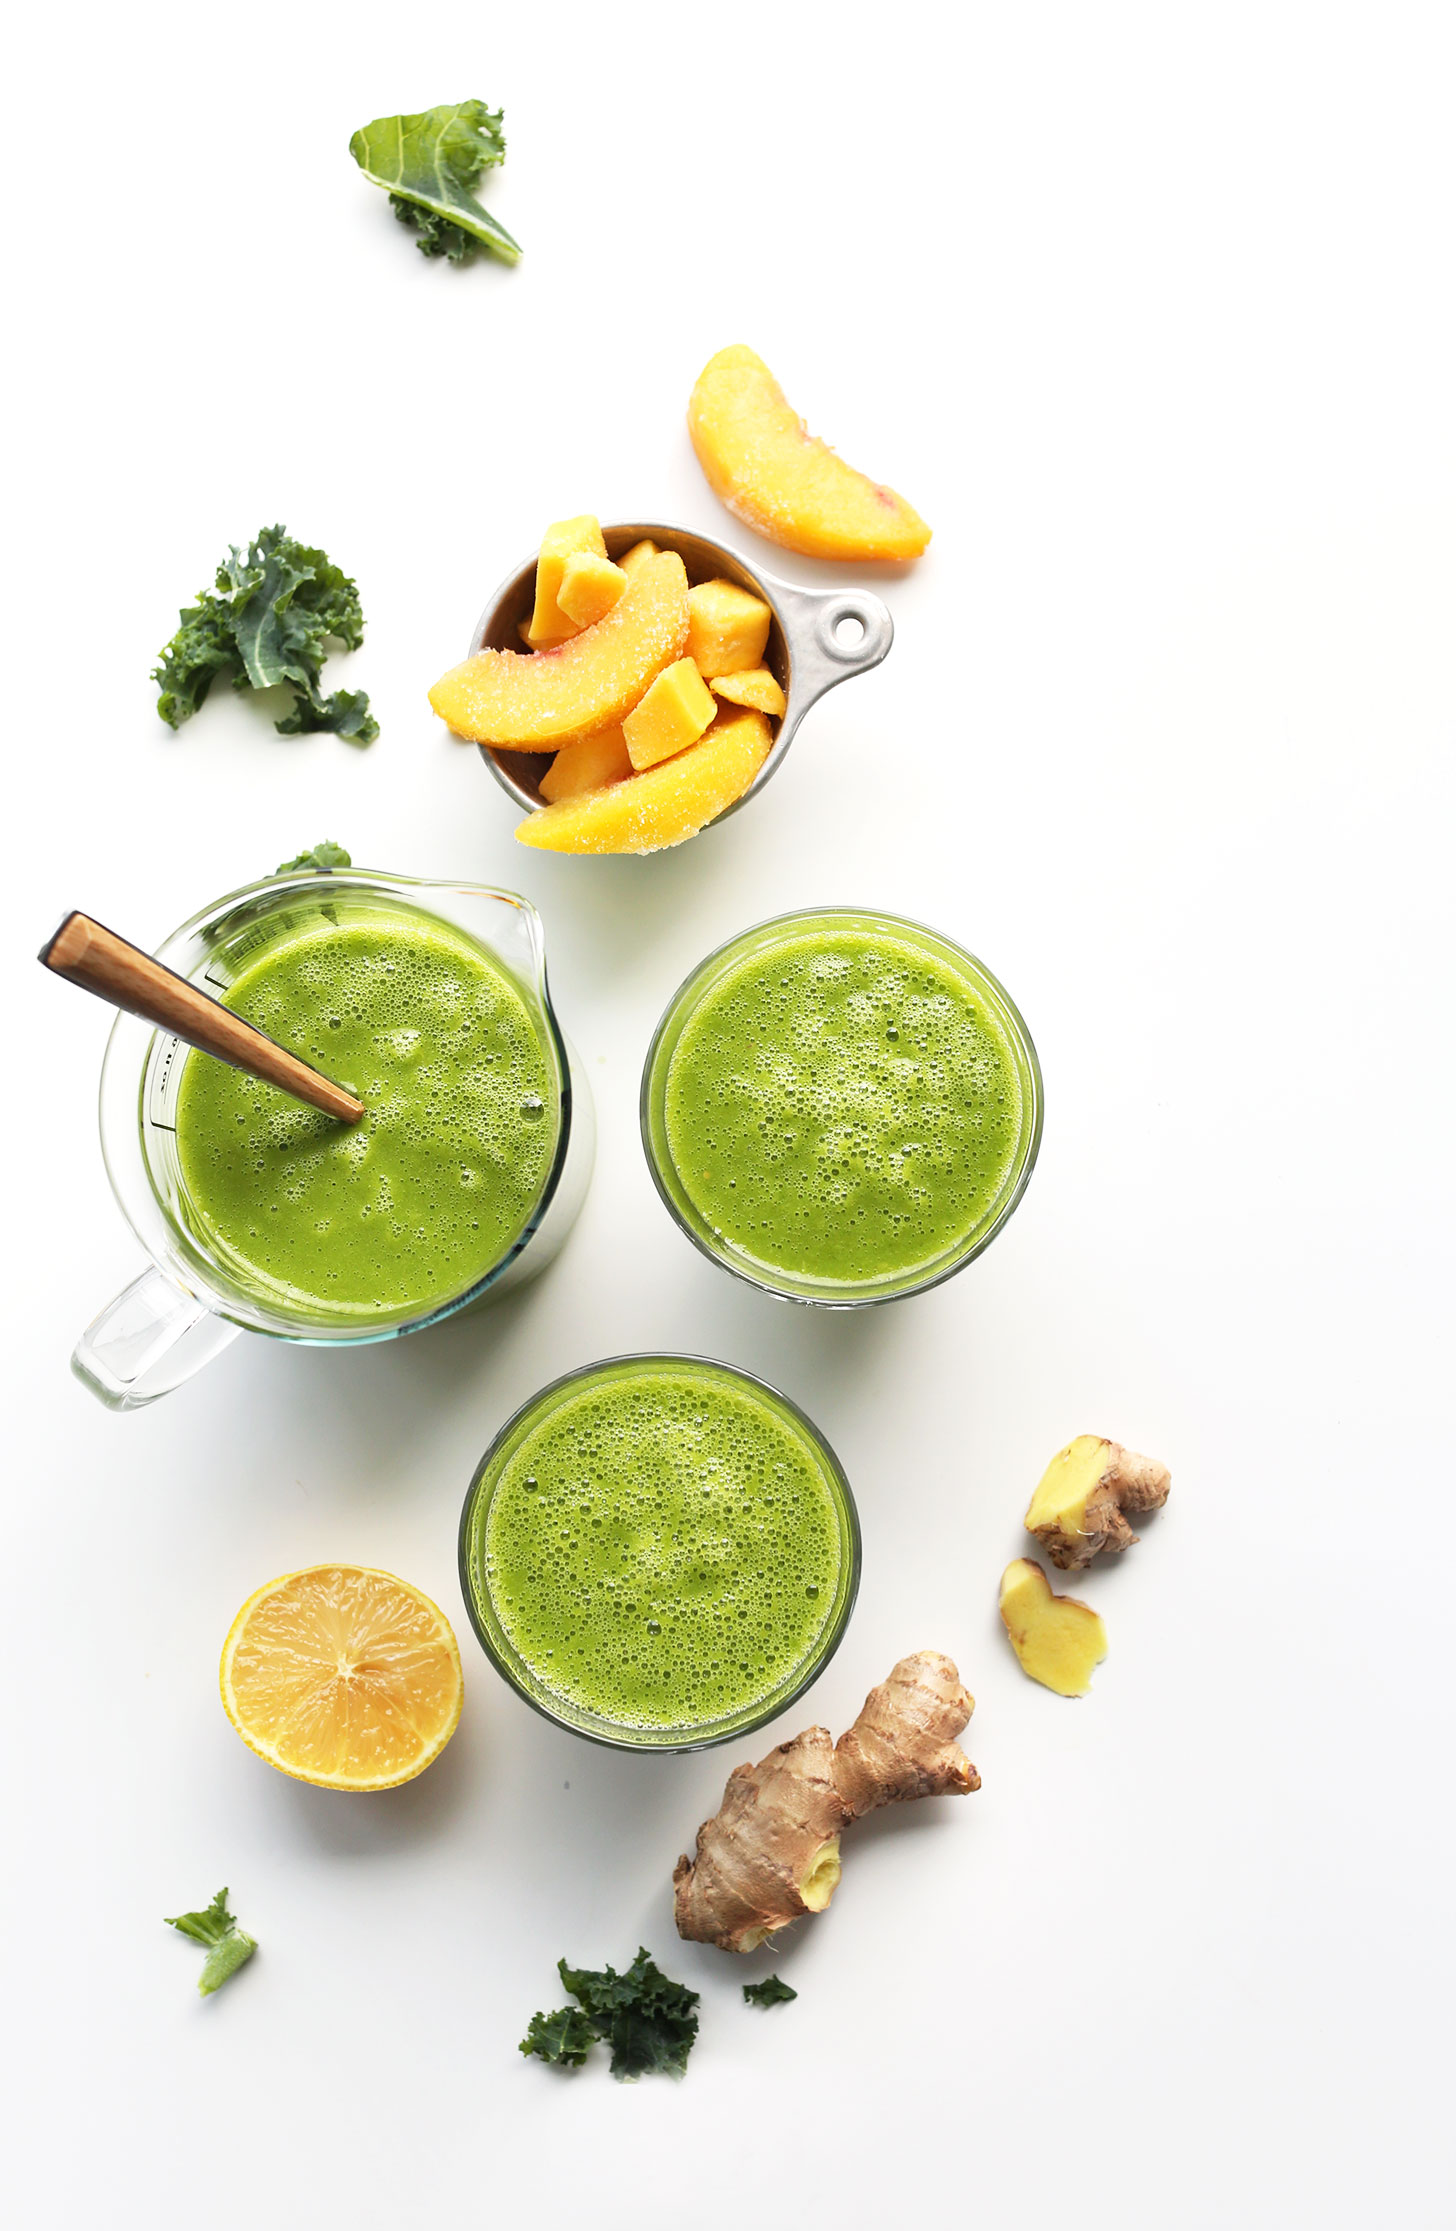 Glasses filled with our Mango Ginger Kale Smoothie recipe and ingredients used to make it